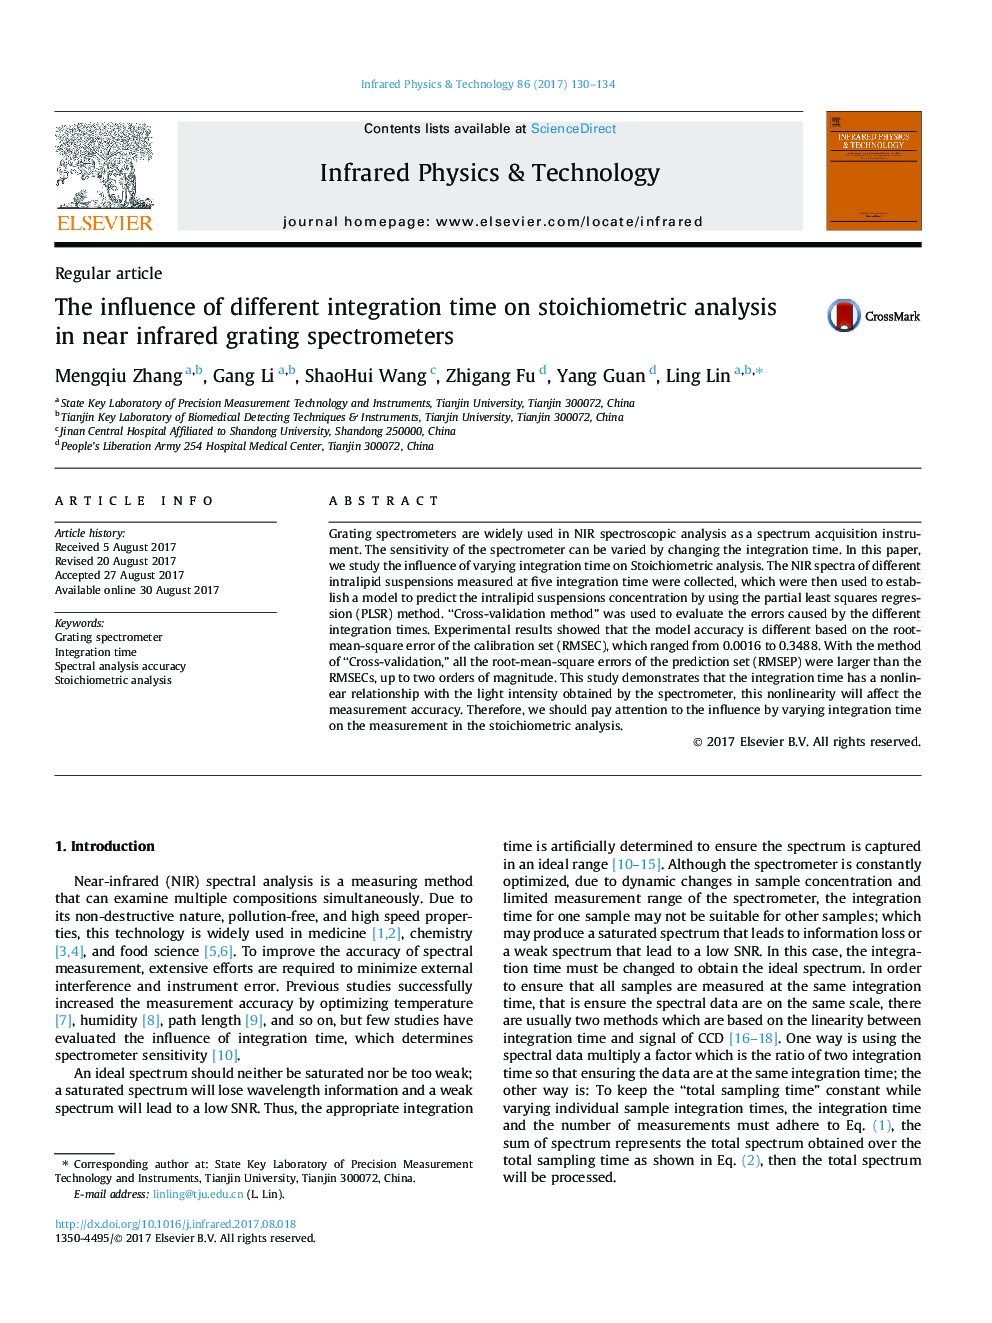 The influence of different integration time on stoichiometric analysis in near infrared grating spectrometers